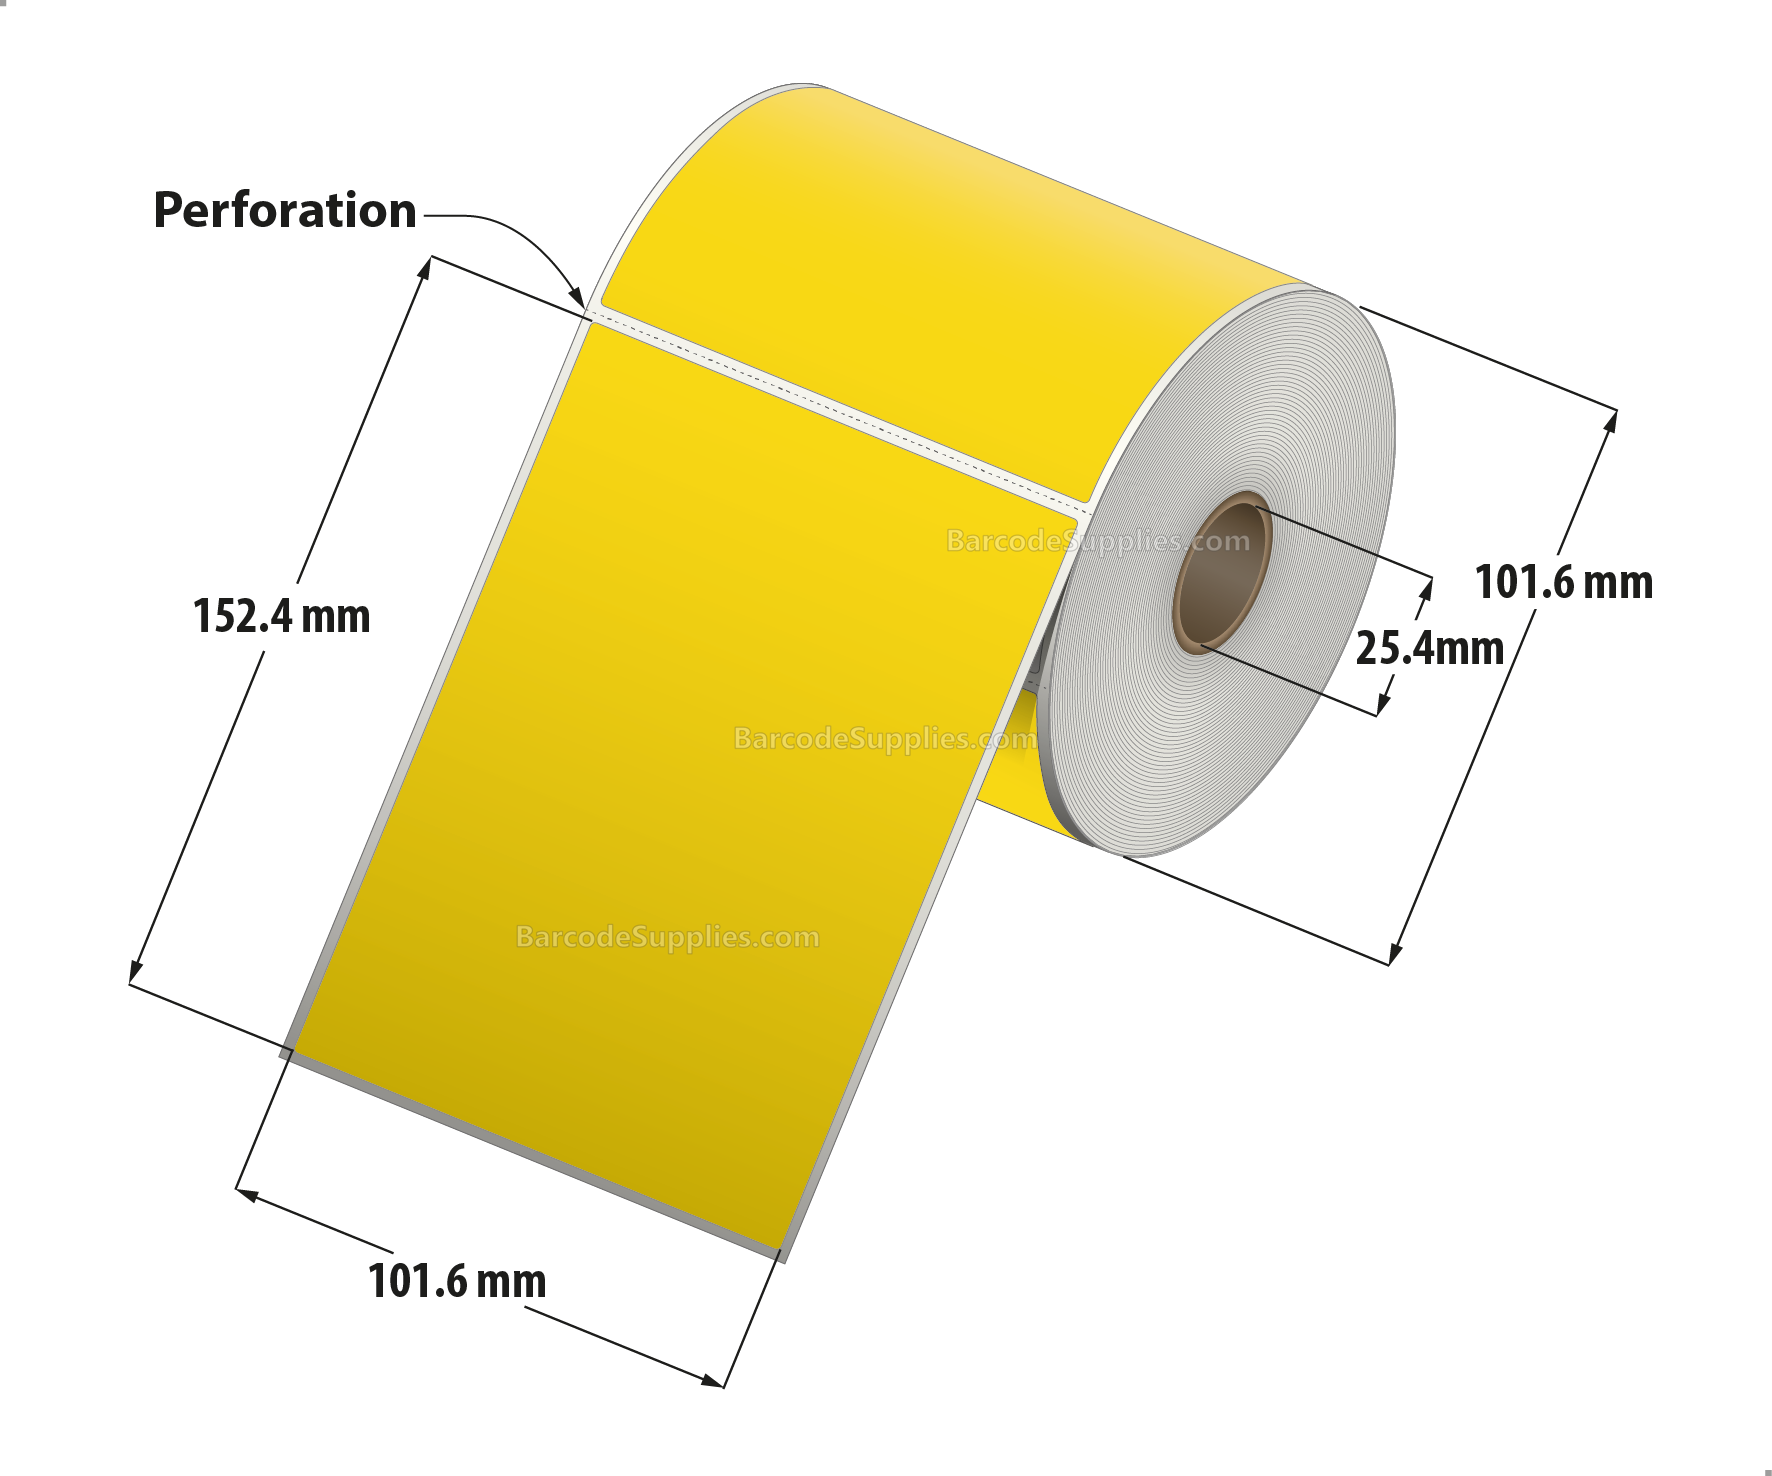 4 x 6 Thermal Transfer Pantone Yellow Labels With Permanent Adhesive - Perforated - 250 Labels Per Roll - Carton Of 12 Rolls - 3000 Labels Total - MPN: RFC-4-6-250-YL